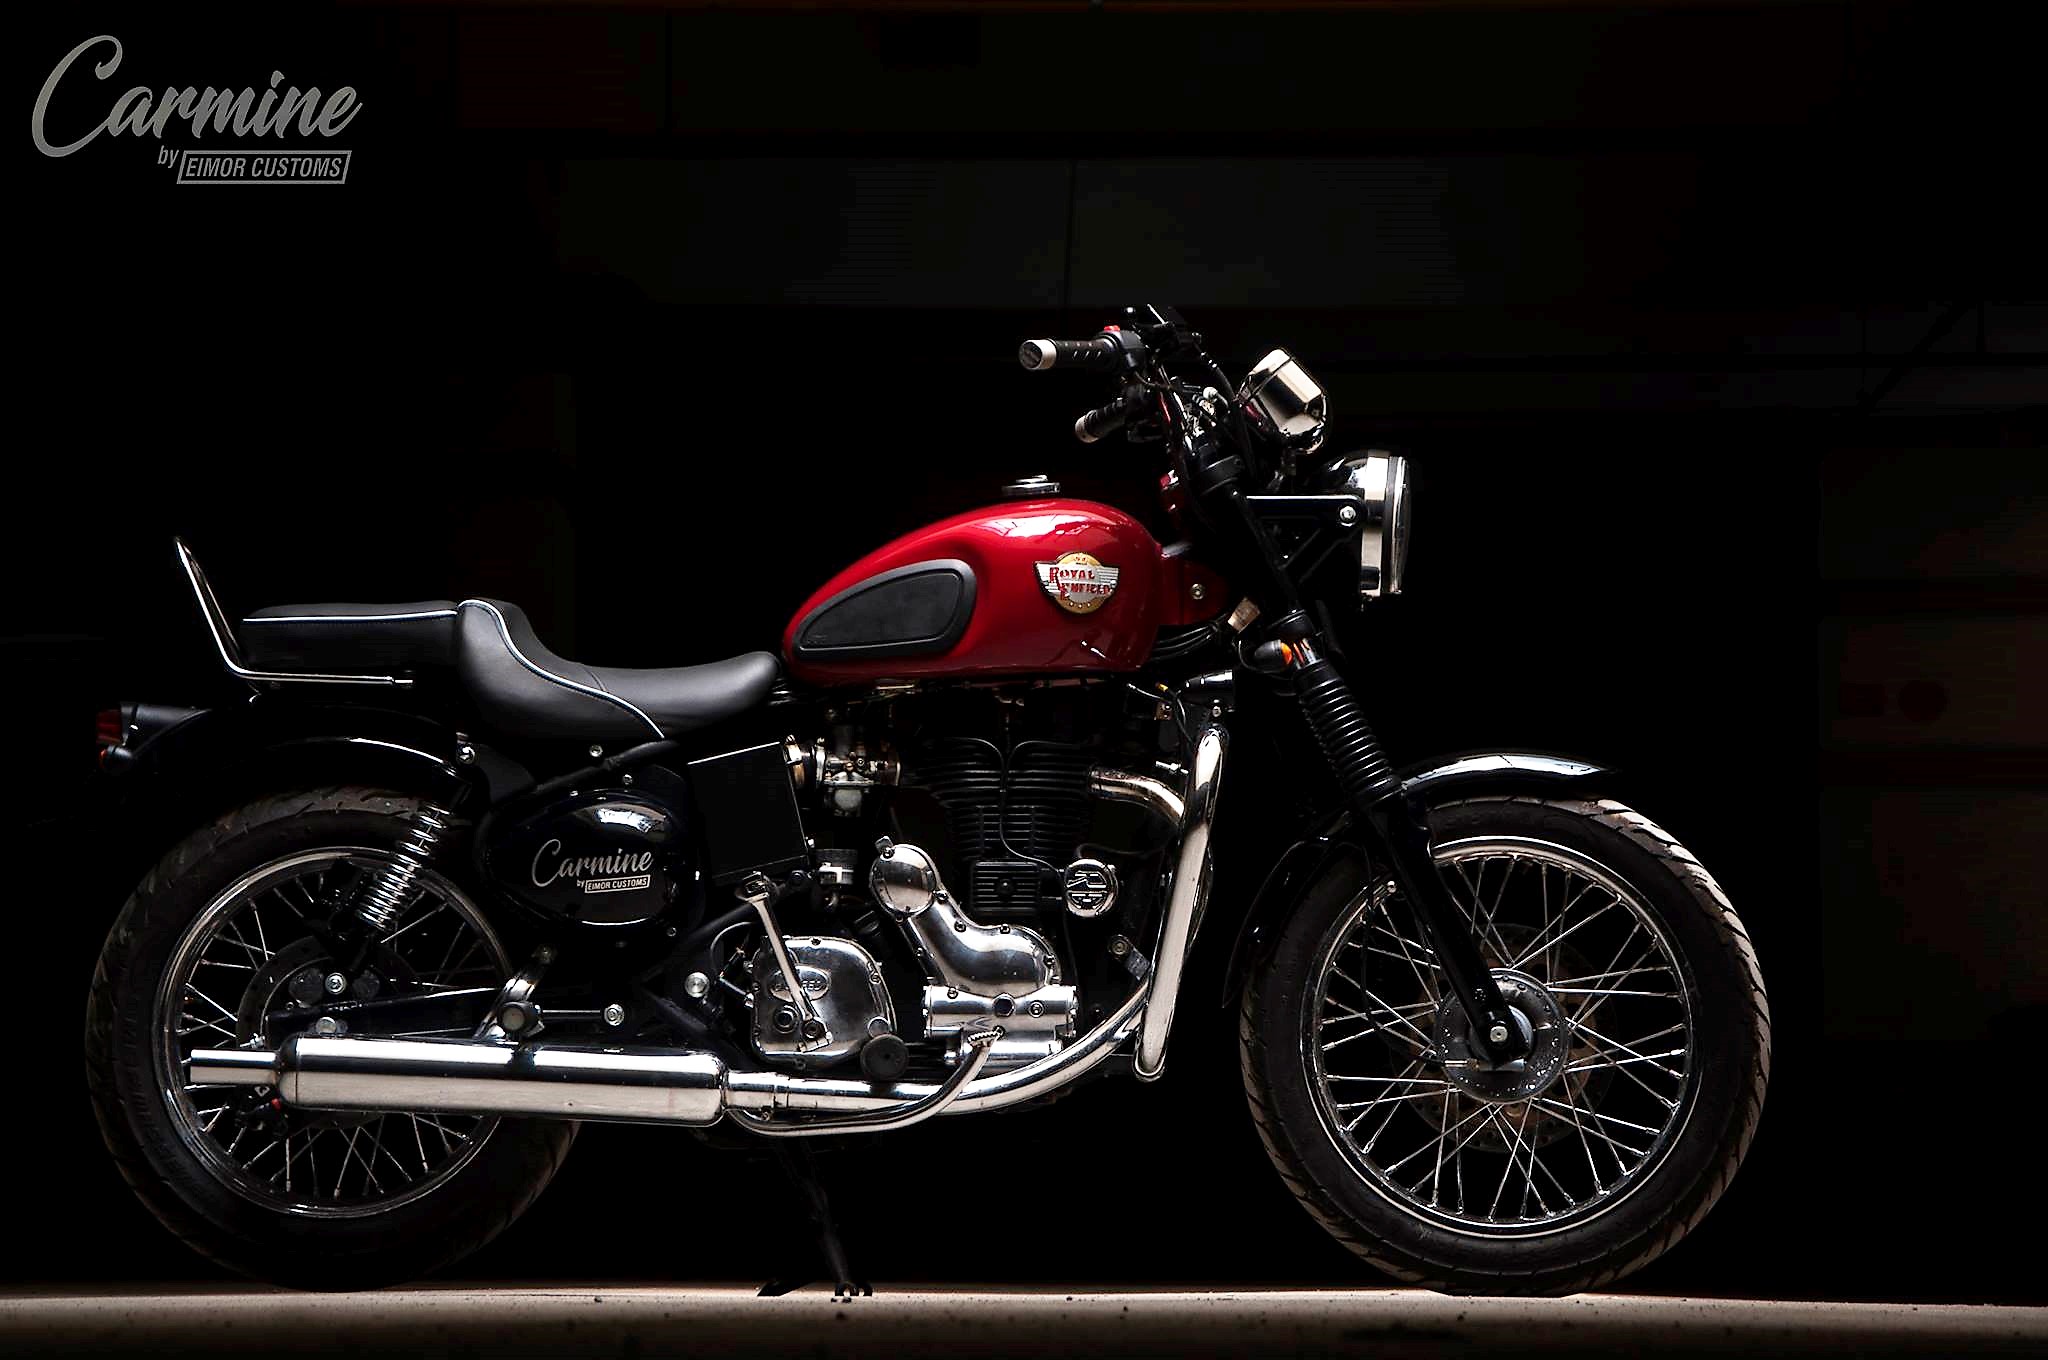 Meet Royal Enfield Carmine 350 Equipped with Premium Parts - image